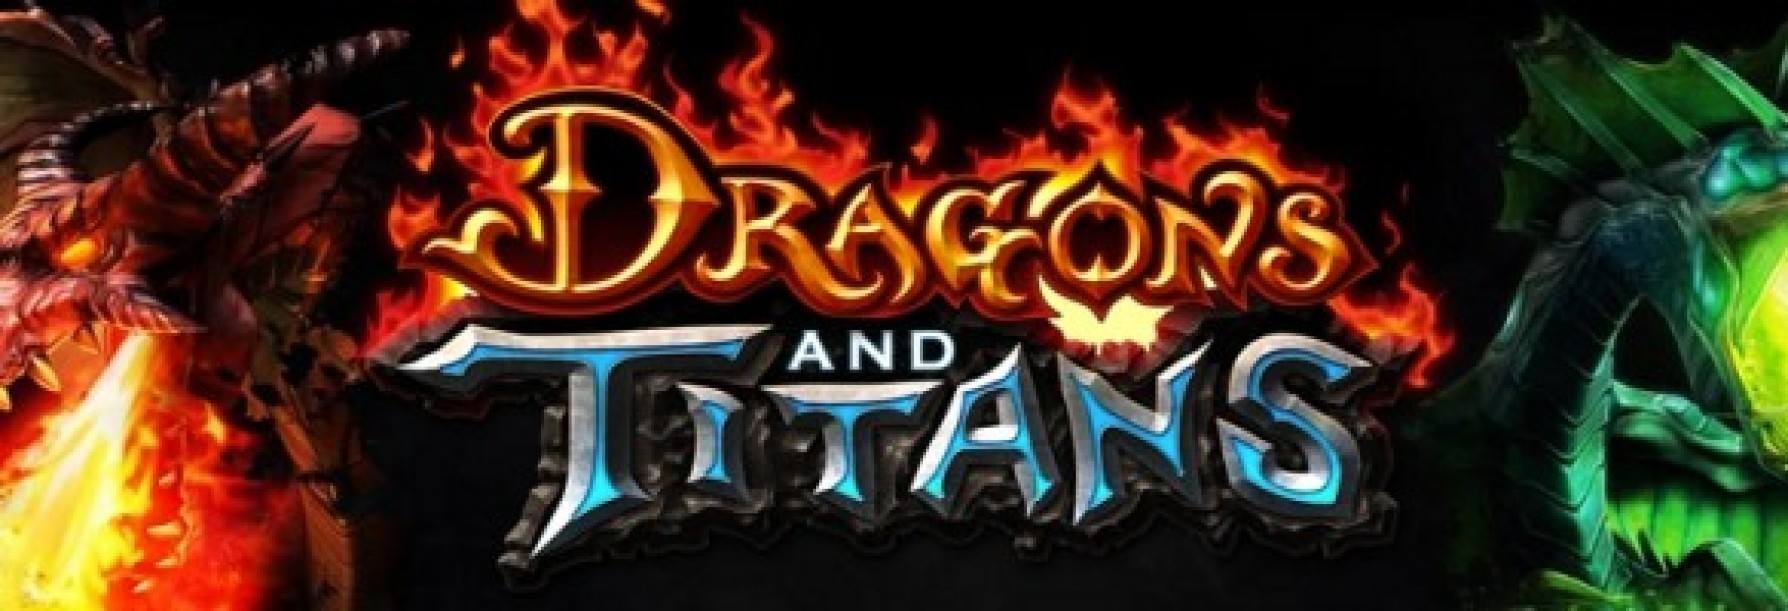 Dragons and Titans dvd cover